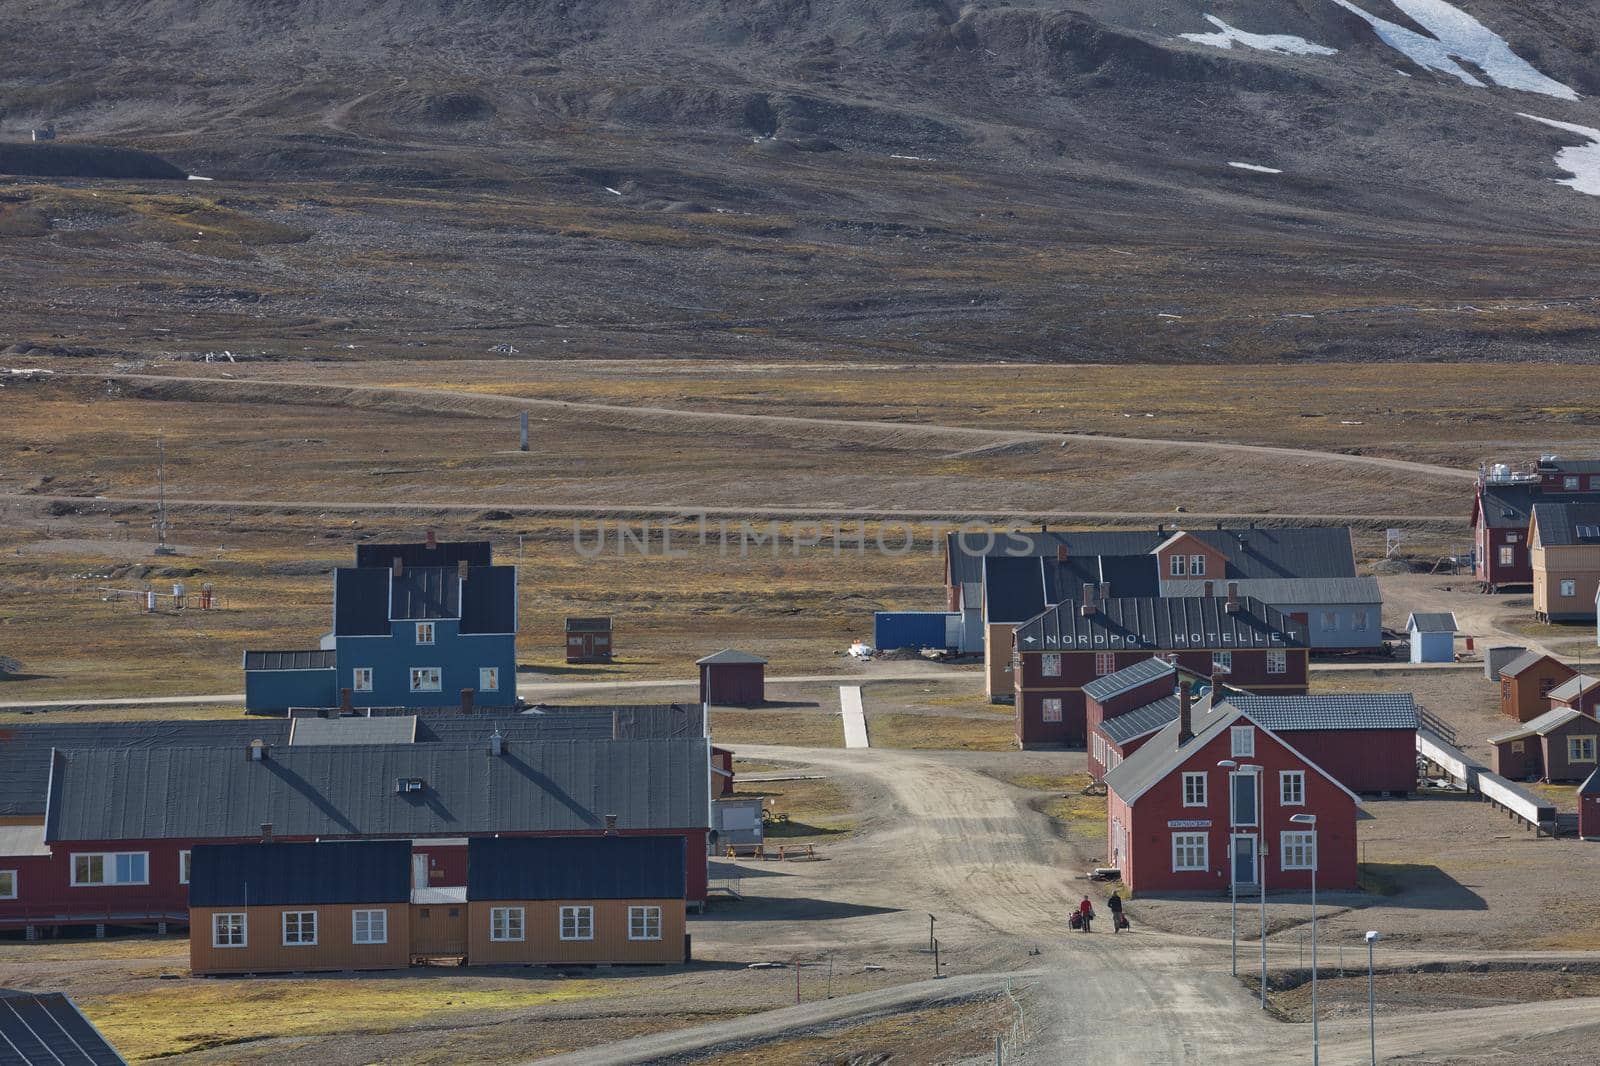 Hotel at town of Ny Alesund in Svalbard, a Norwegian archipelago between Norway and North Pole. It's the most northerly civilian settlement in the world by wondry